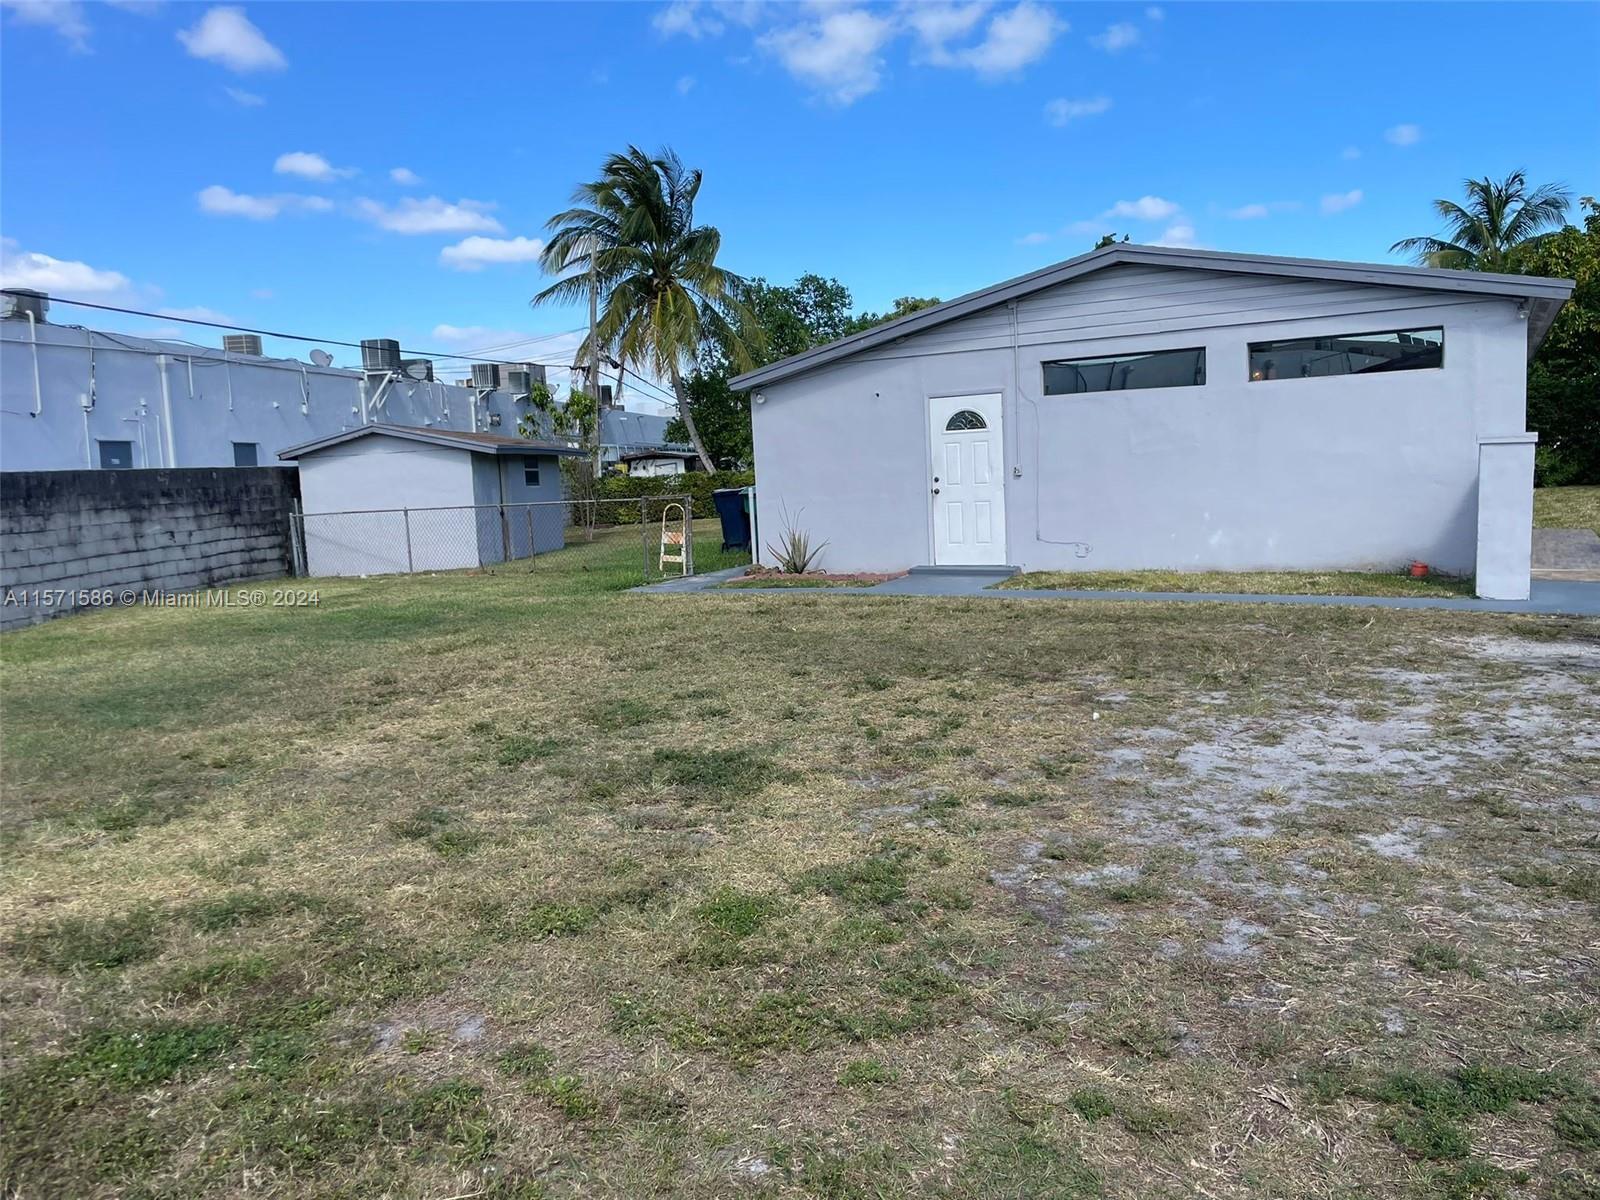 7945 SW 9th Ter, Miami, Florida 33144, 3 Bedrooms Bedrooms, ,2 BathroomsBathrooms,Residential,For Sale,7945 SW 9th Ter,A11571586